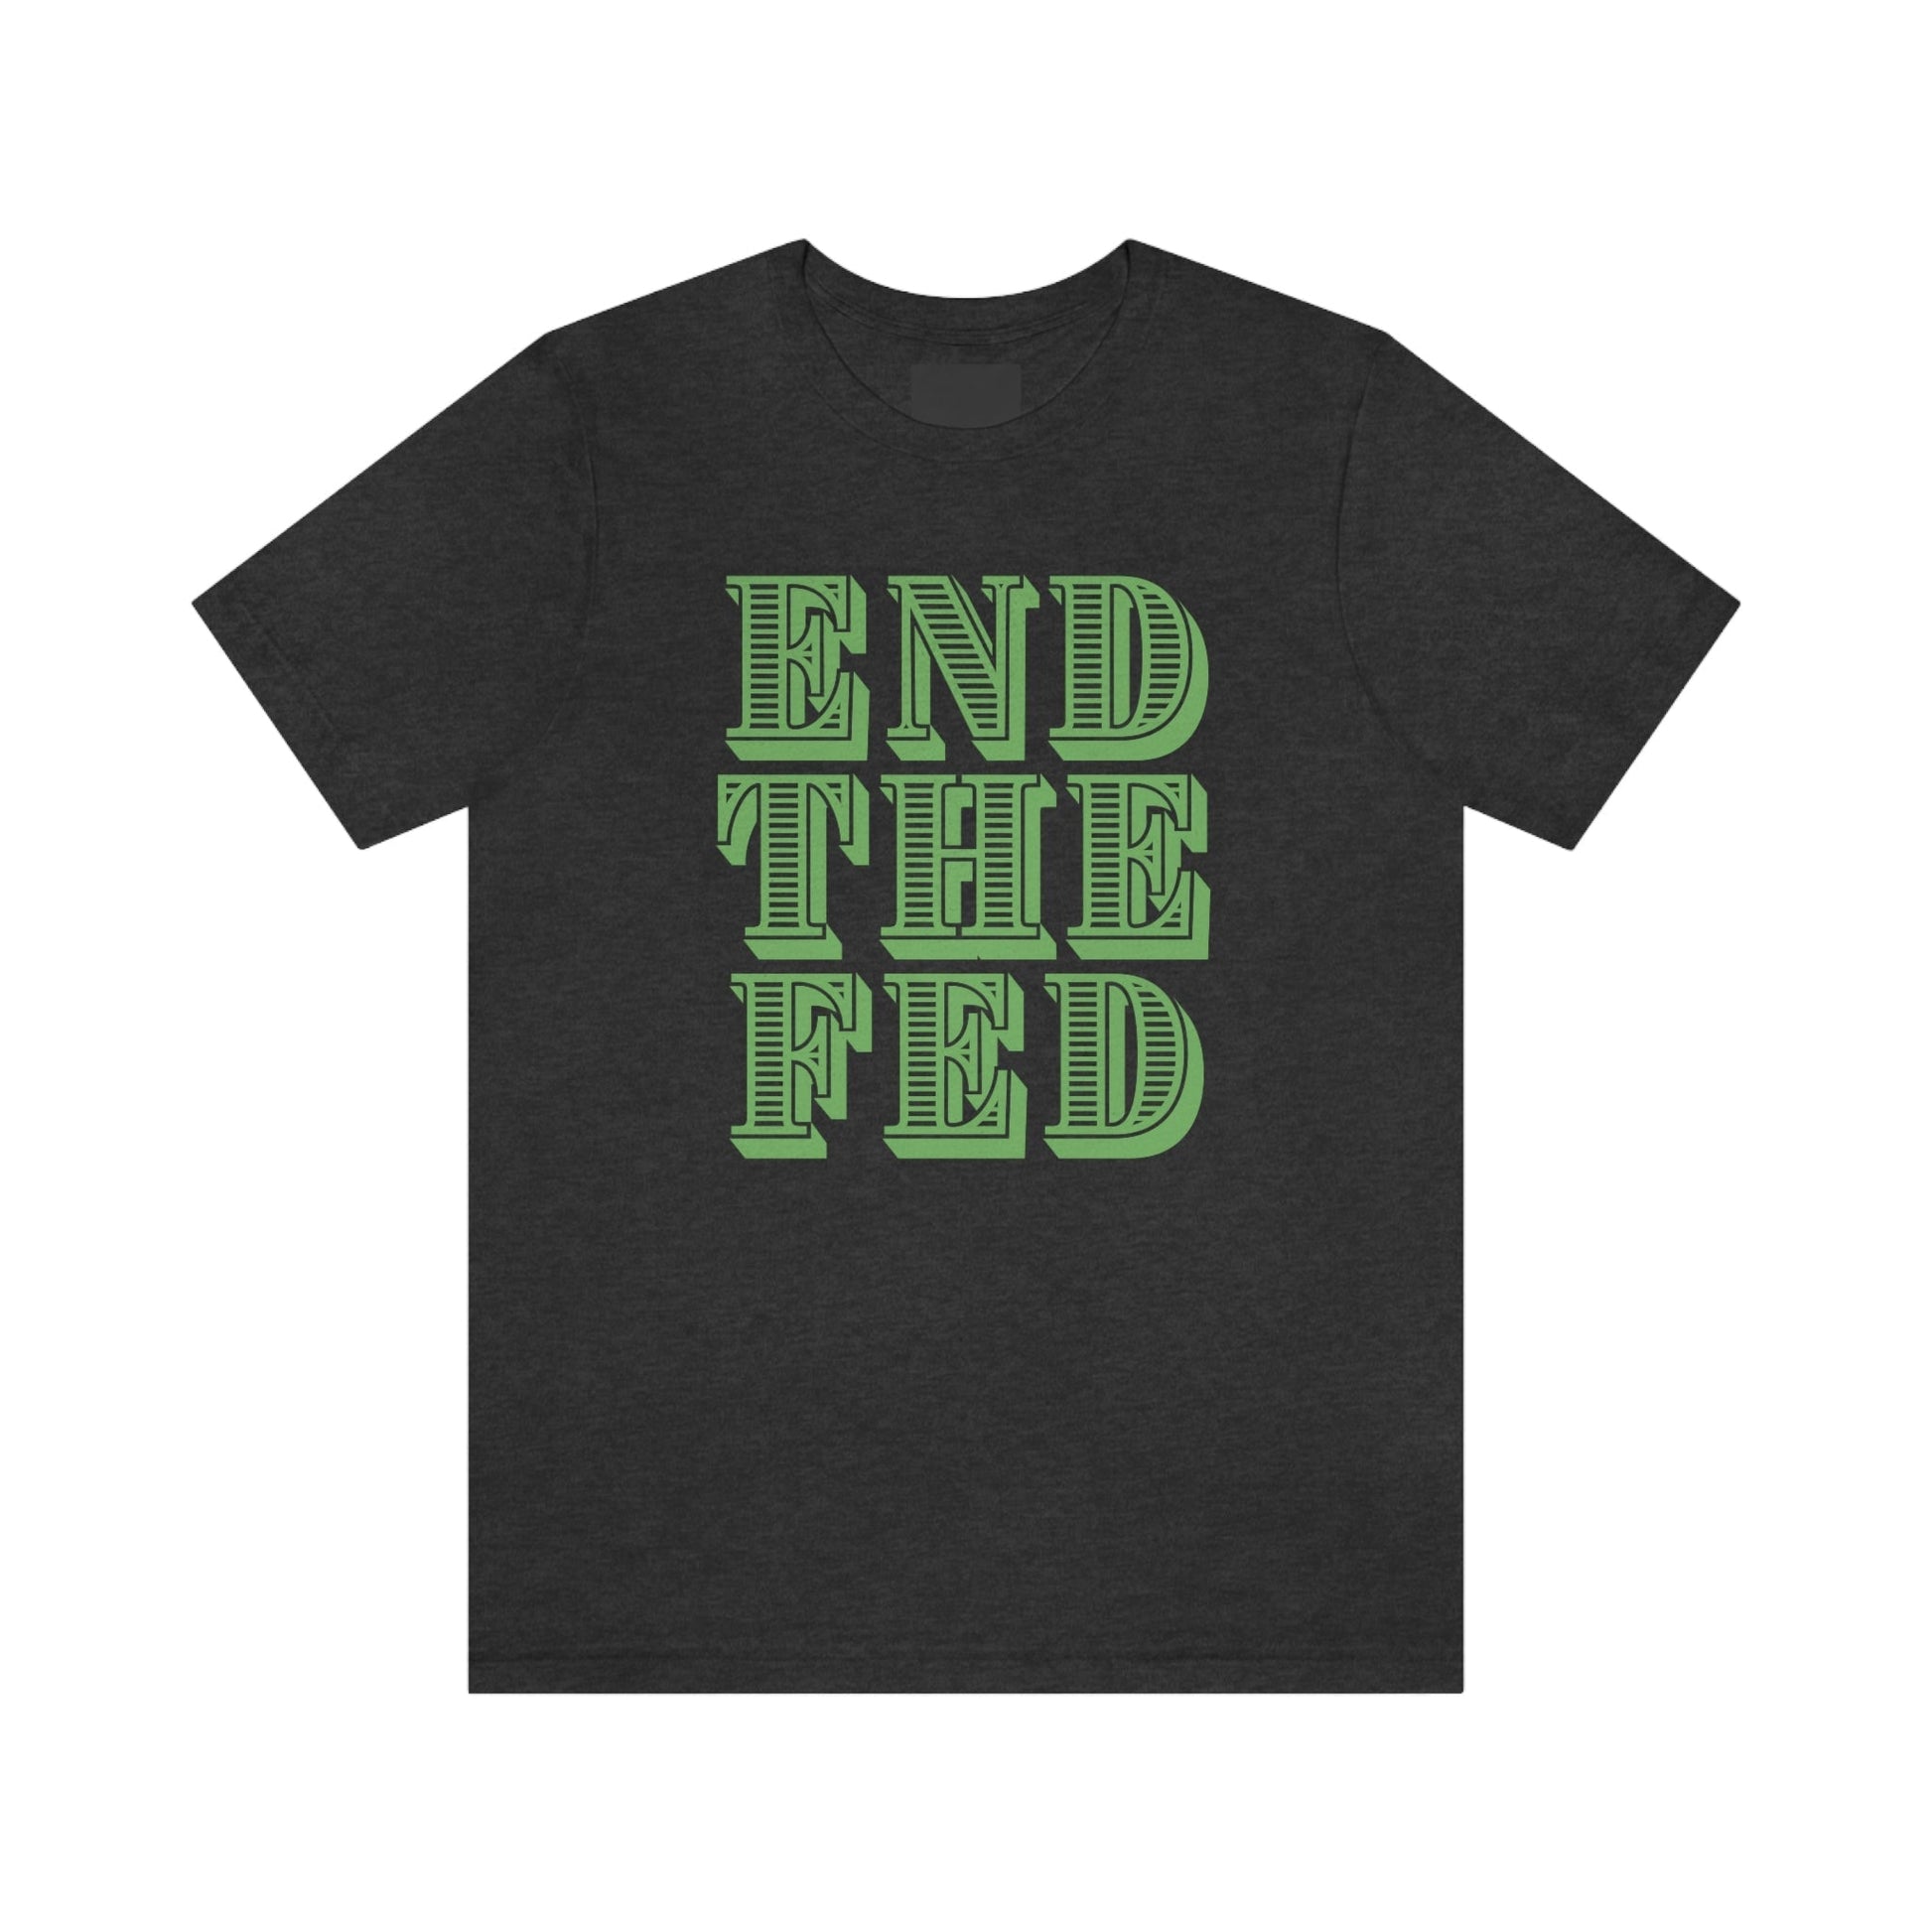 END THE FED - Premium T-Shirt - Just $27! Shop now at Who Touched The Thermostat?